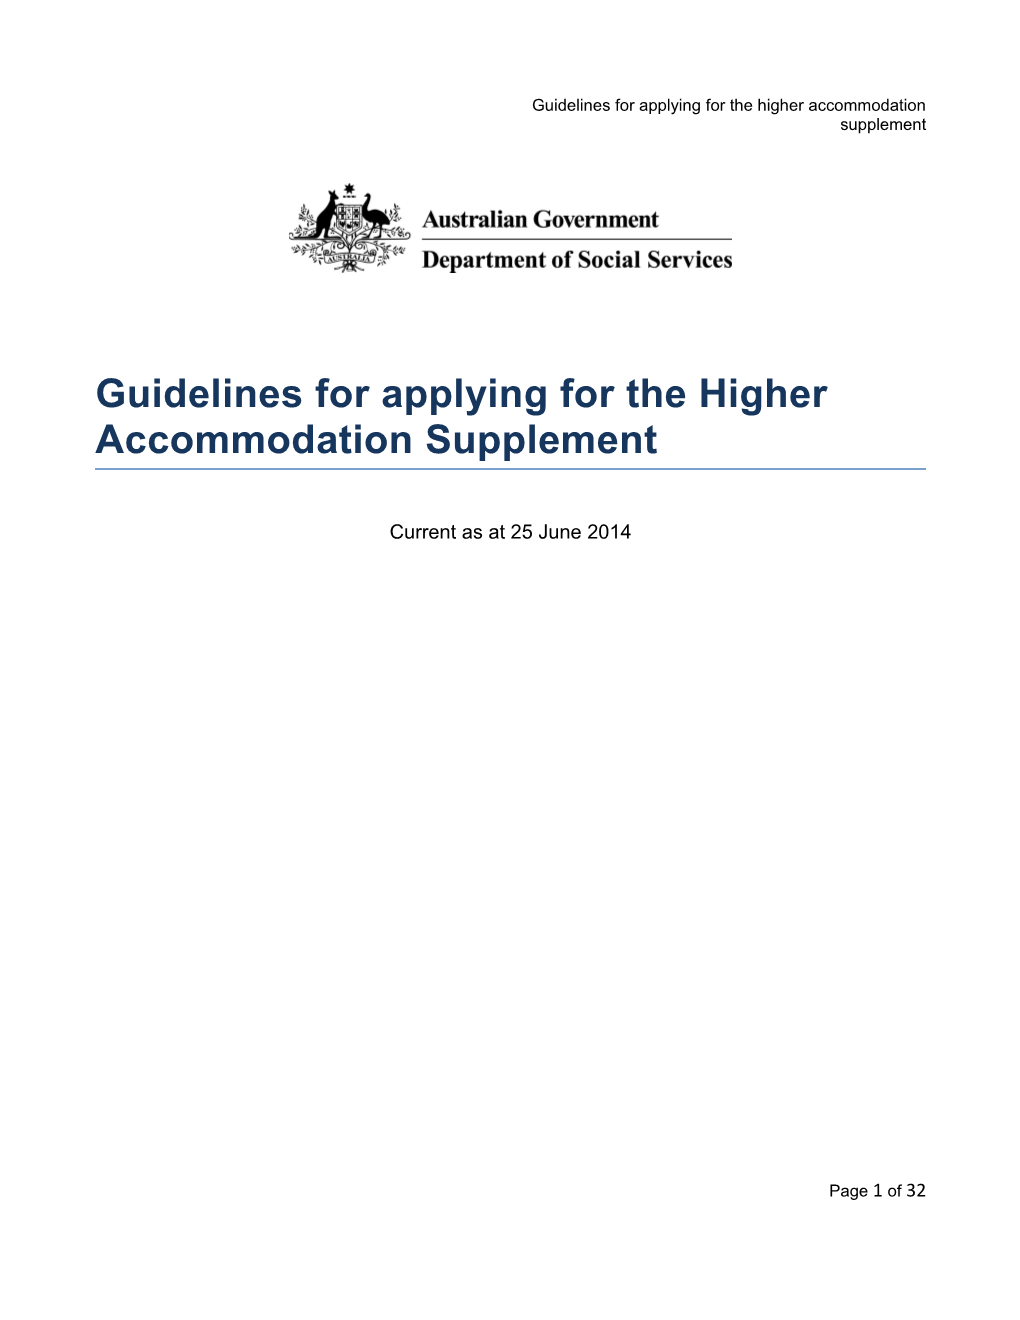 Guidelines for Applying for the Higher Accommodation Supplement